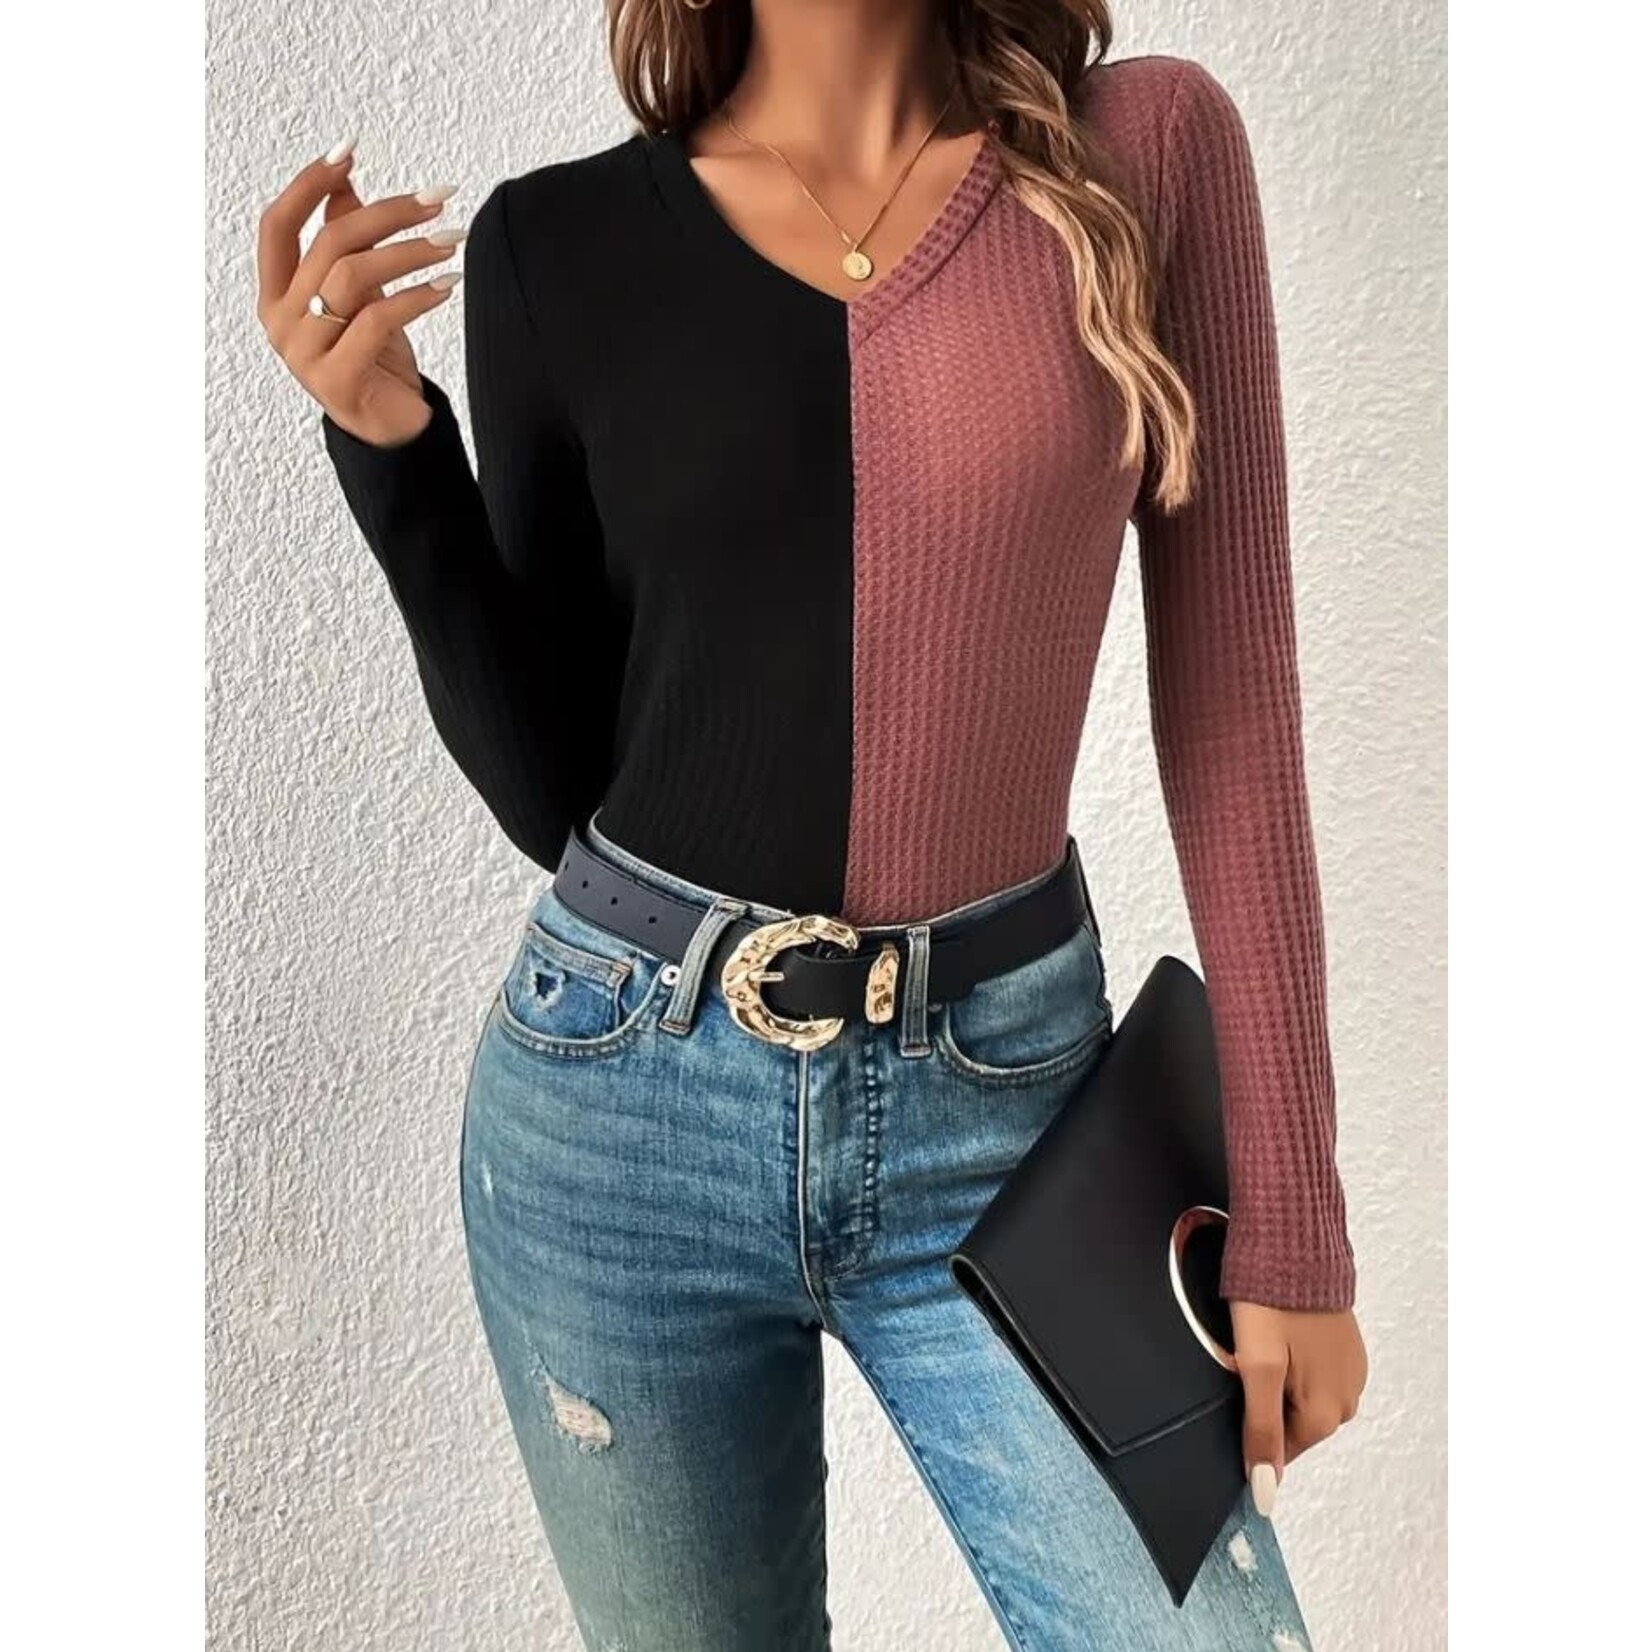 GGS Color Block Waffle Knit Top Black Dusty Rose